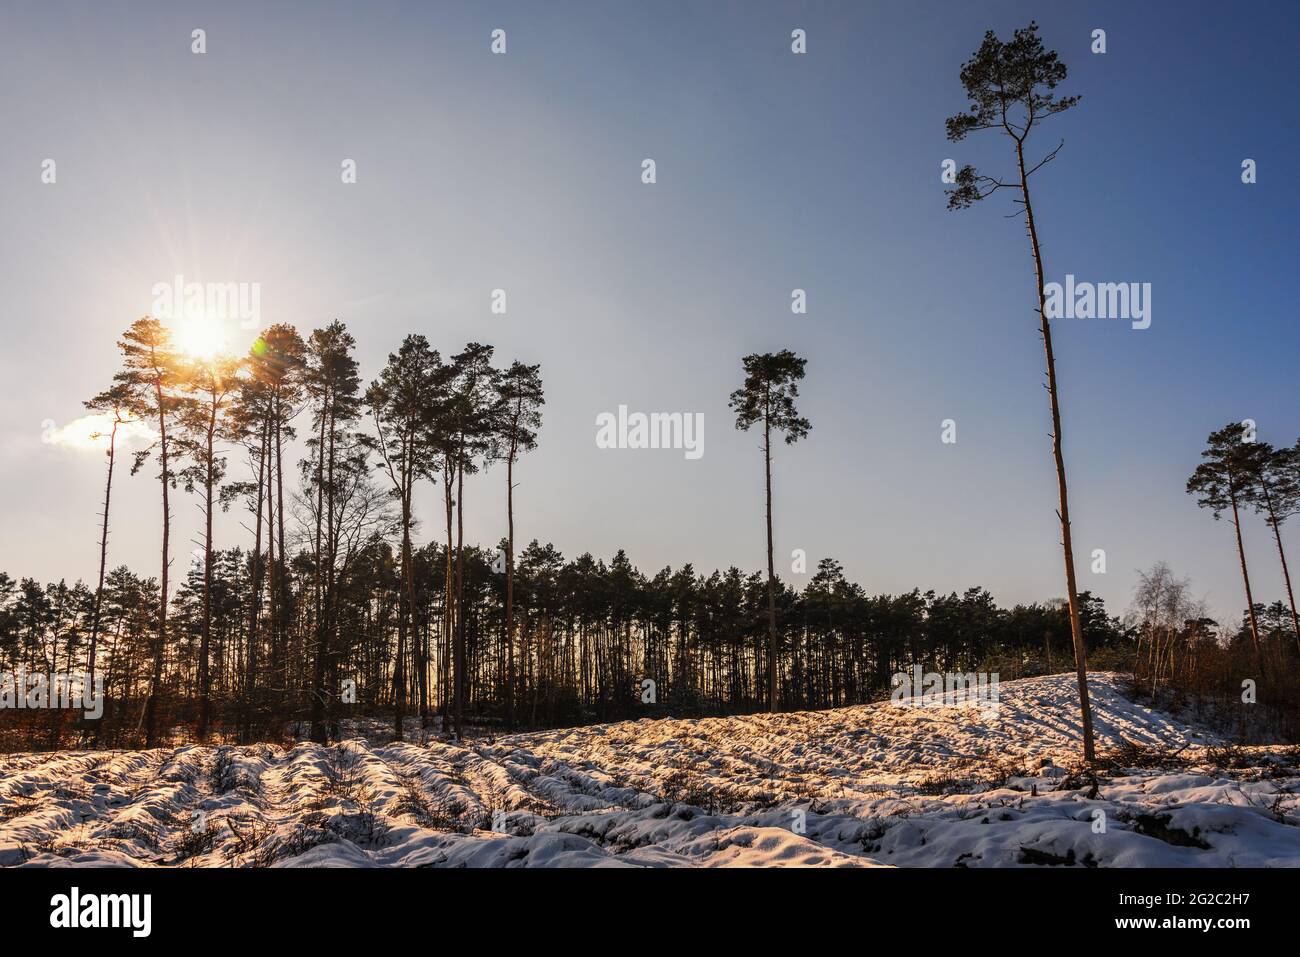 Snow-covered forest after tree felling at sunset, the effect of normal forest management. The area is prepared for new plantings. Single pine trees an Stock Photo